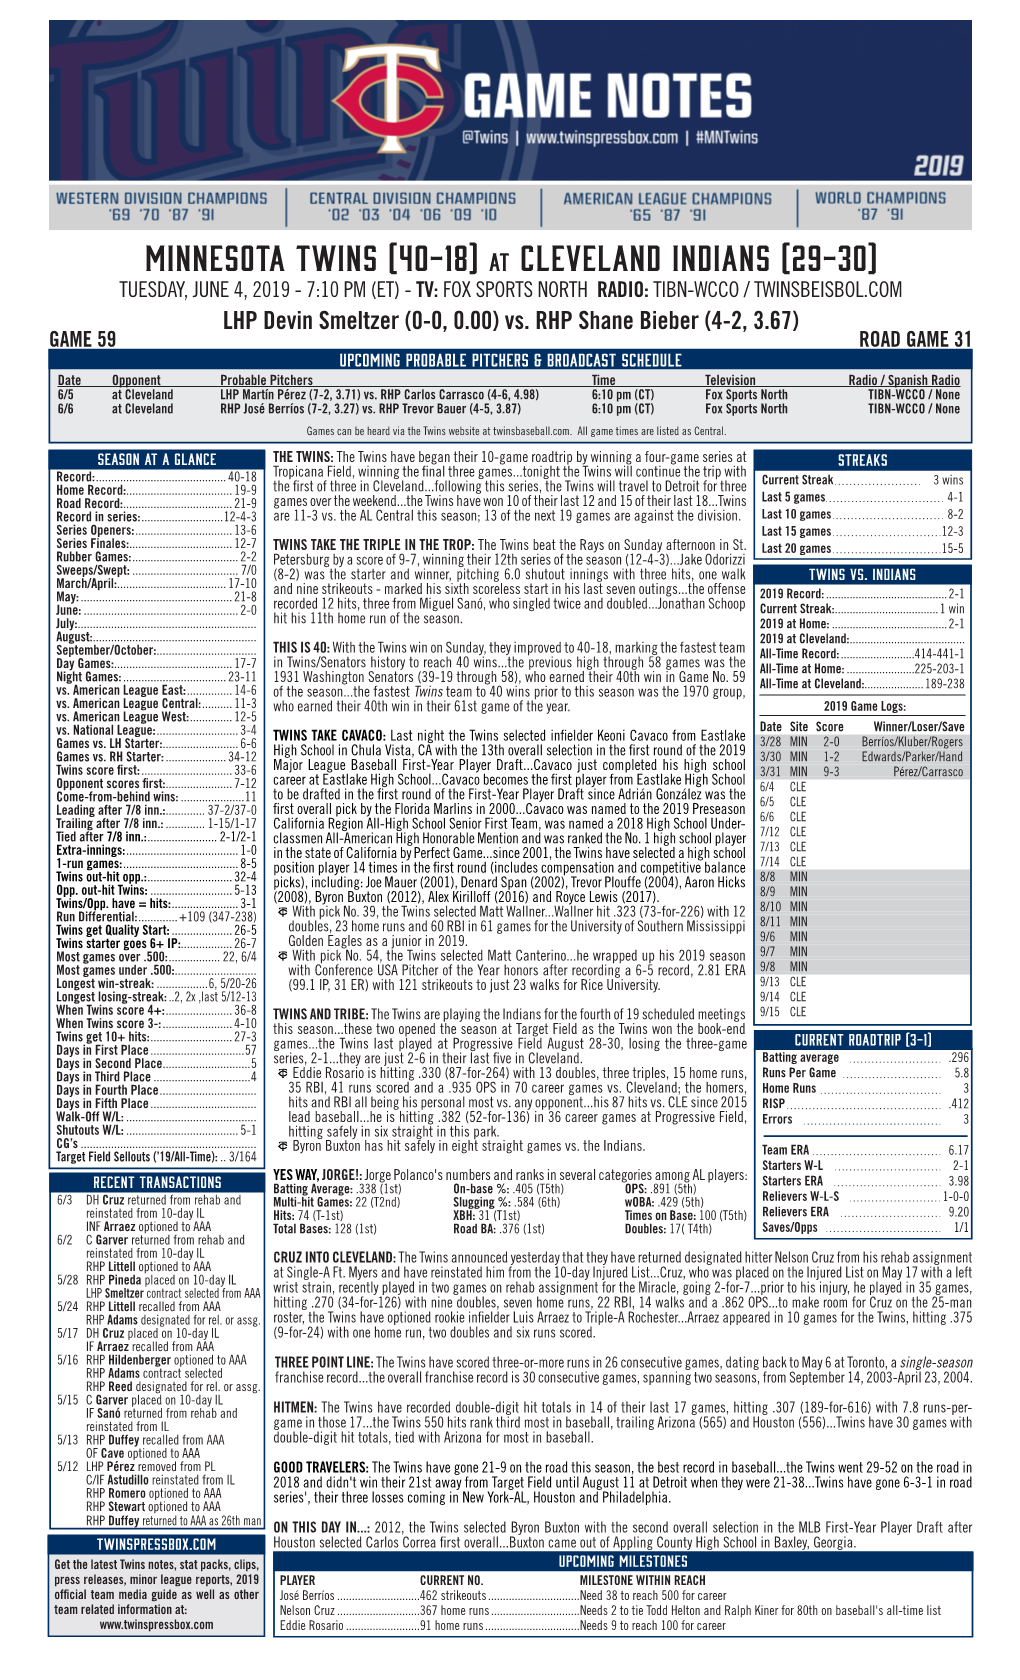 Twins Notes, 6-4-19 At